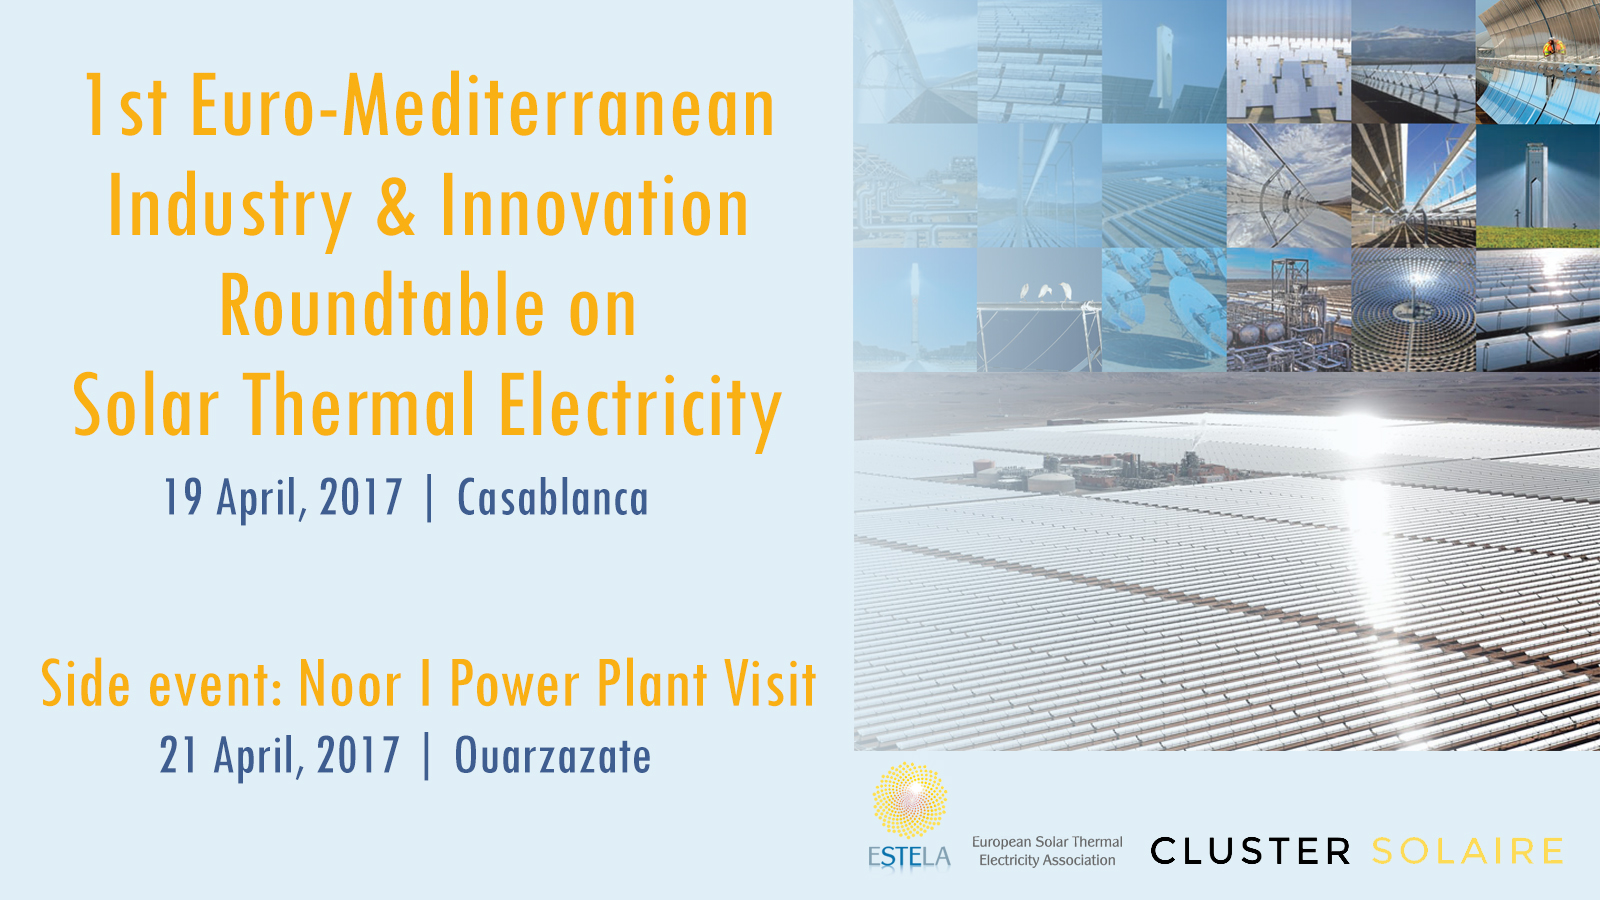 1st Euro-Mediterranean Industry & innovation Roundtable on Solar Thermal Electricity